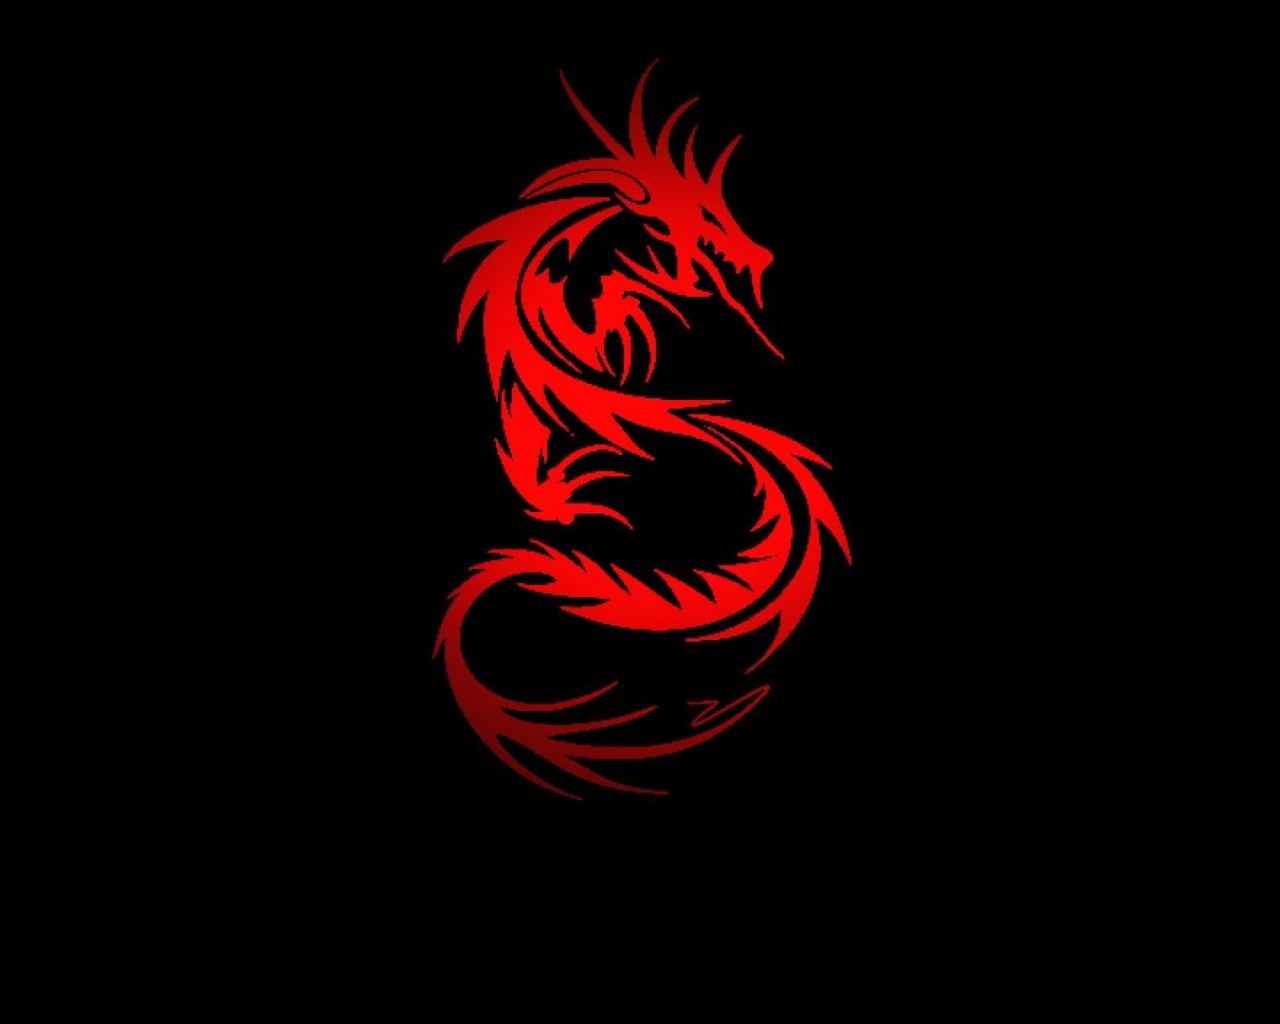 Free download 1920x1080 Red Dragon wallpaper HD 562608 Dragon rider in [1920x1080] for your Desktop, Mobile & Tablet. Explore Free Dragon Desktop Wallpaper. Dragons Wallpaper